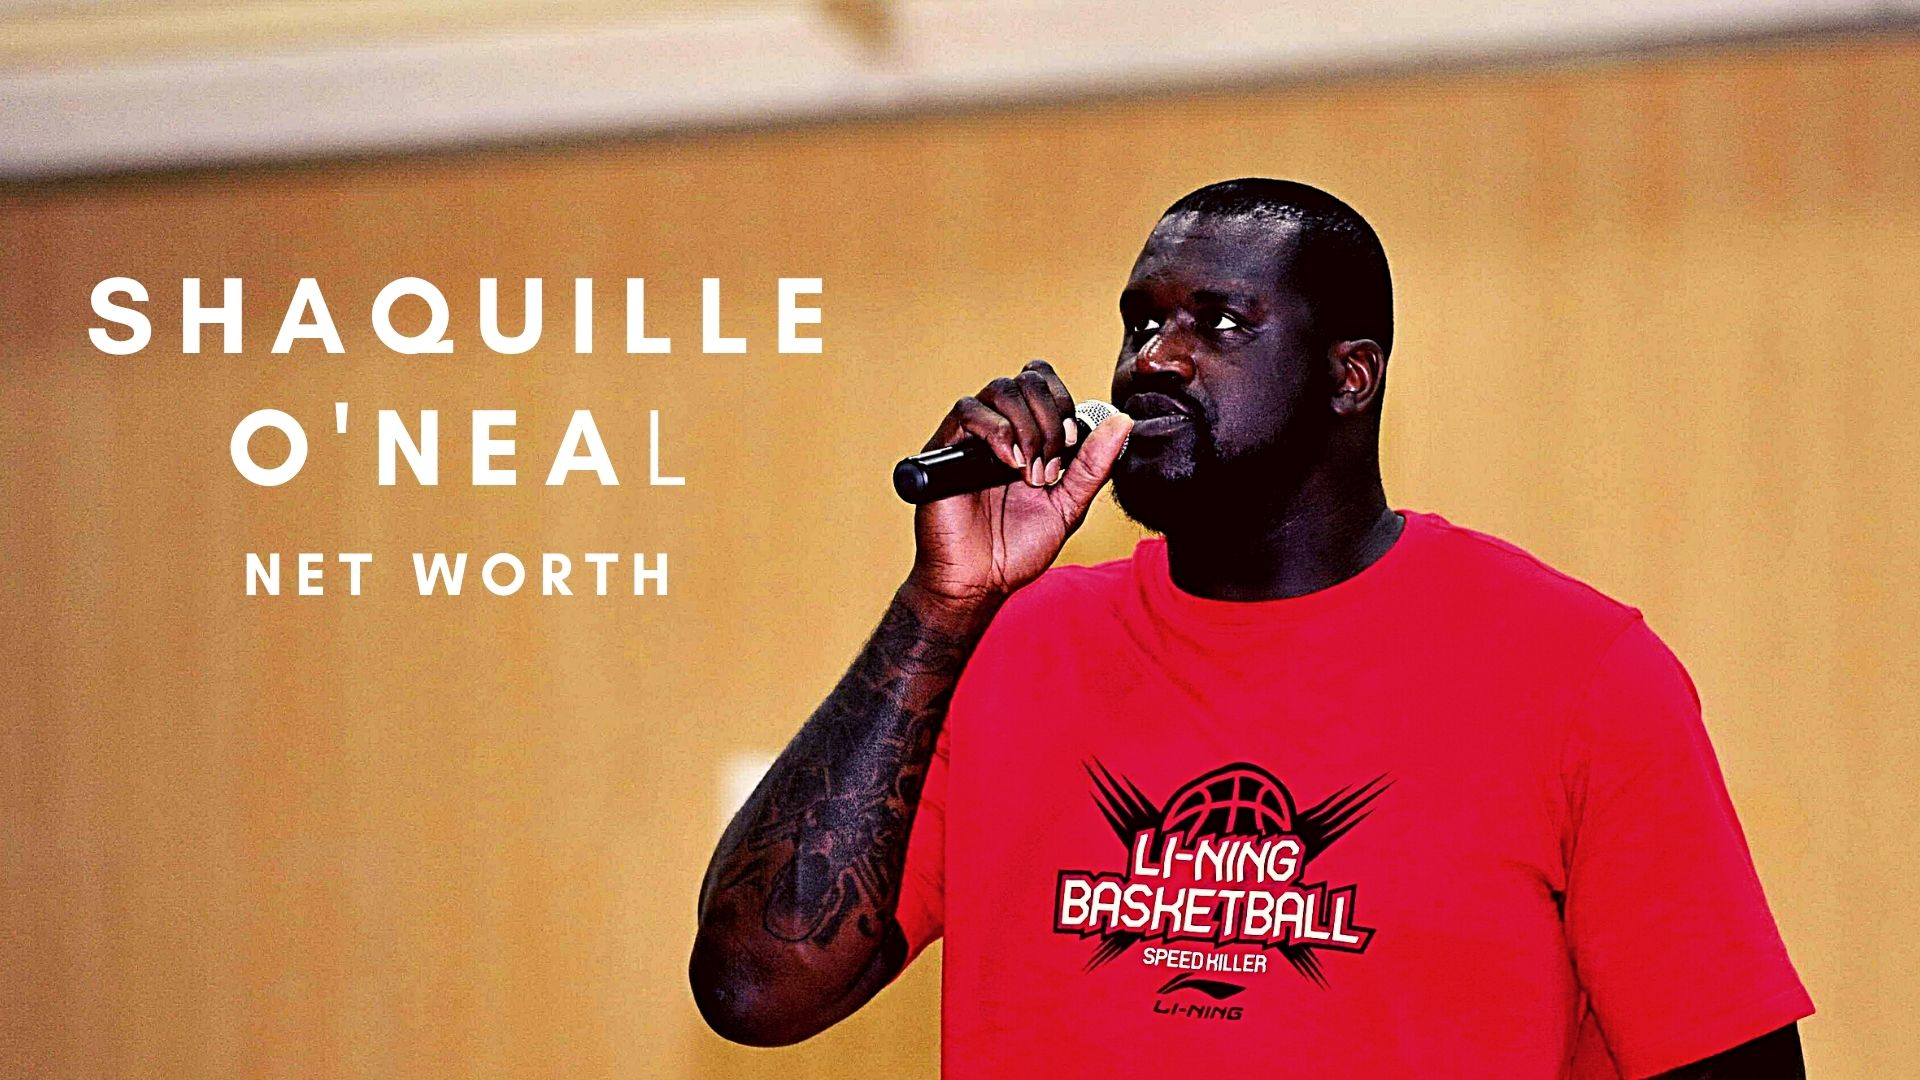 Shaquille O’Neal 2021  Net Worth, Salary, Records, and Endorsements